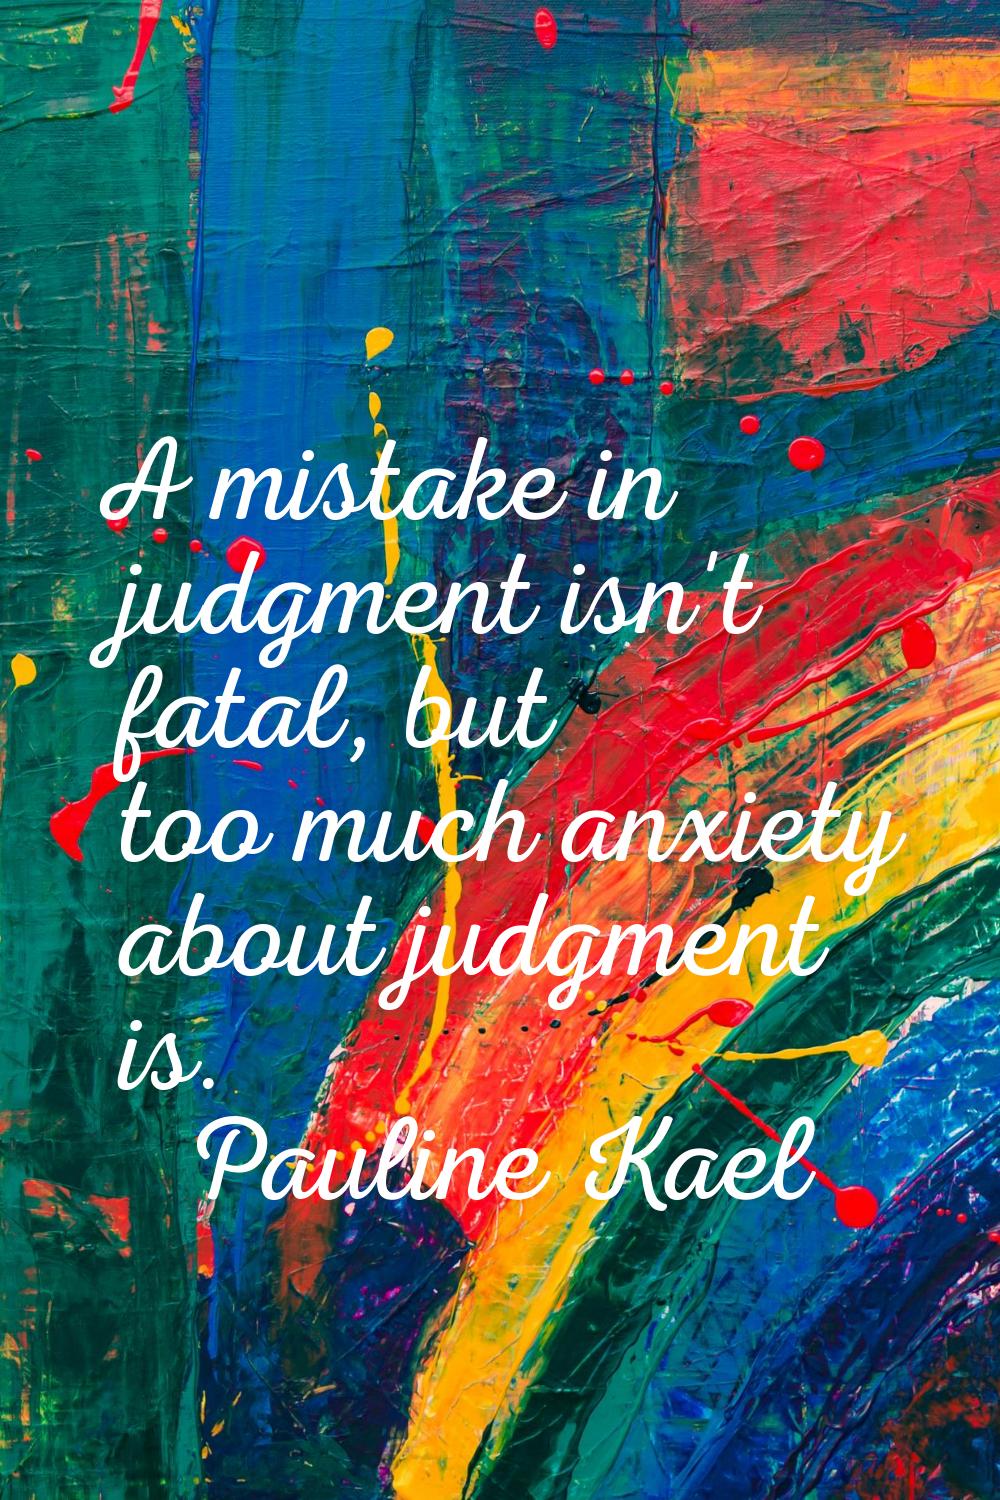 A mistake in judgment isn't fatal, but too much anxiety about judgment is.